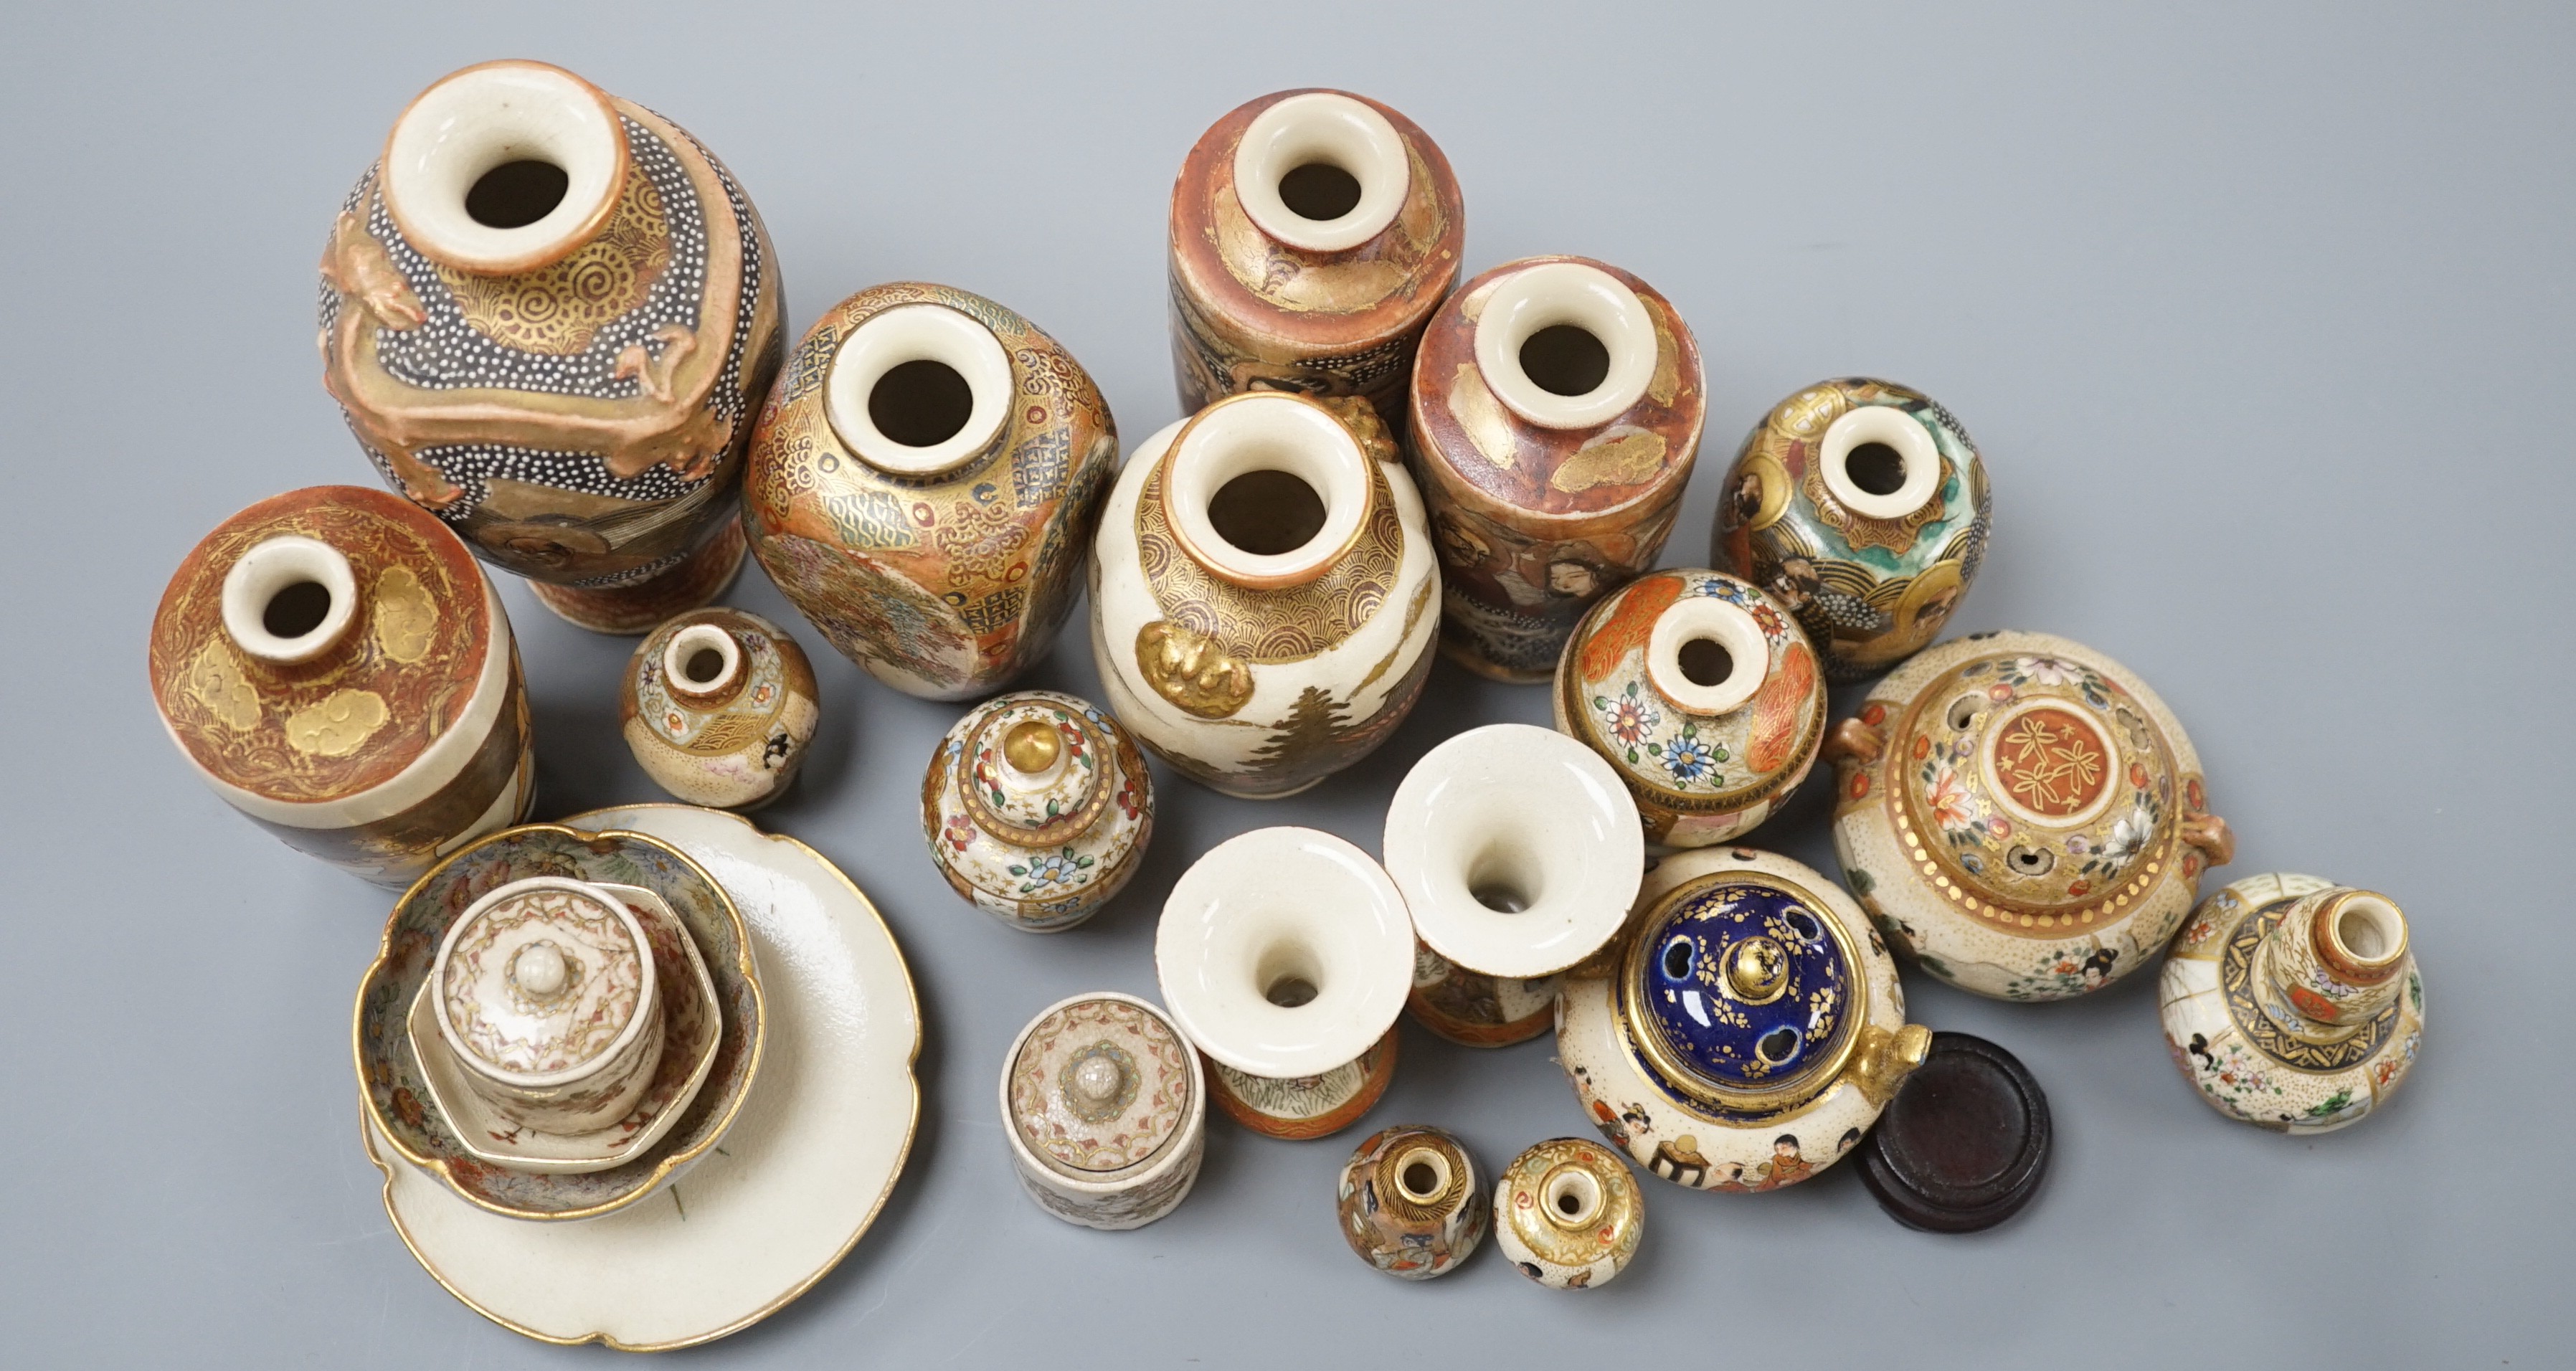 A group of small and miniature Satsuma pottery vases, koros and covers and dishes, late 19th/early 20th century, 3cm - 12cm